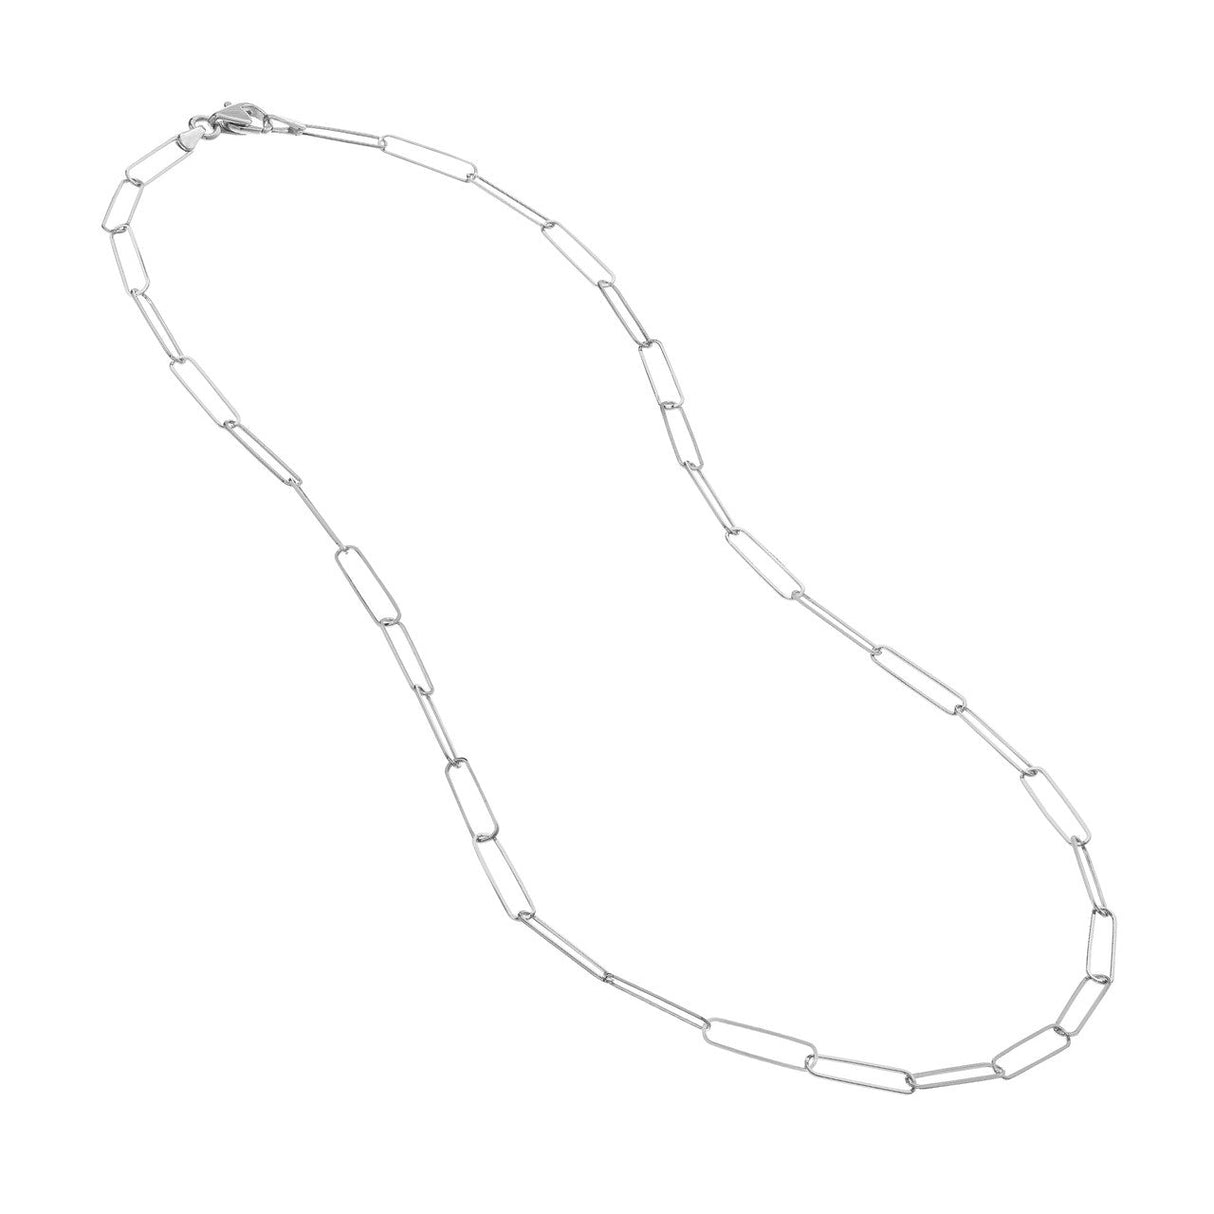 14K Gold Chain, Paper Clip Chain with Pear Lock 3,6mm, Gold Chain Necklace This stunning 14K gold chain necklace is crafted with a paper clip chain featuring a pear lock of 3.6mm. Enjoy the durability and gorgeous shine of this classic necklace made of high-quality gold.